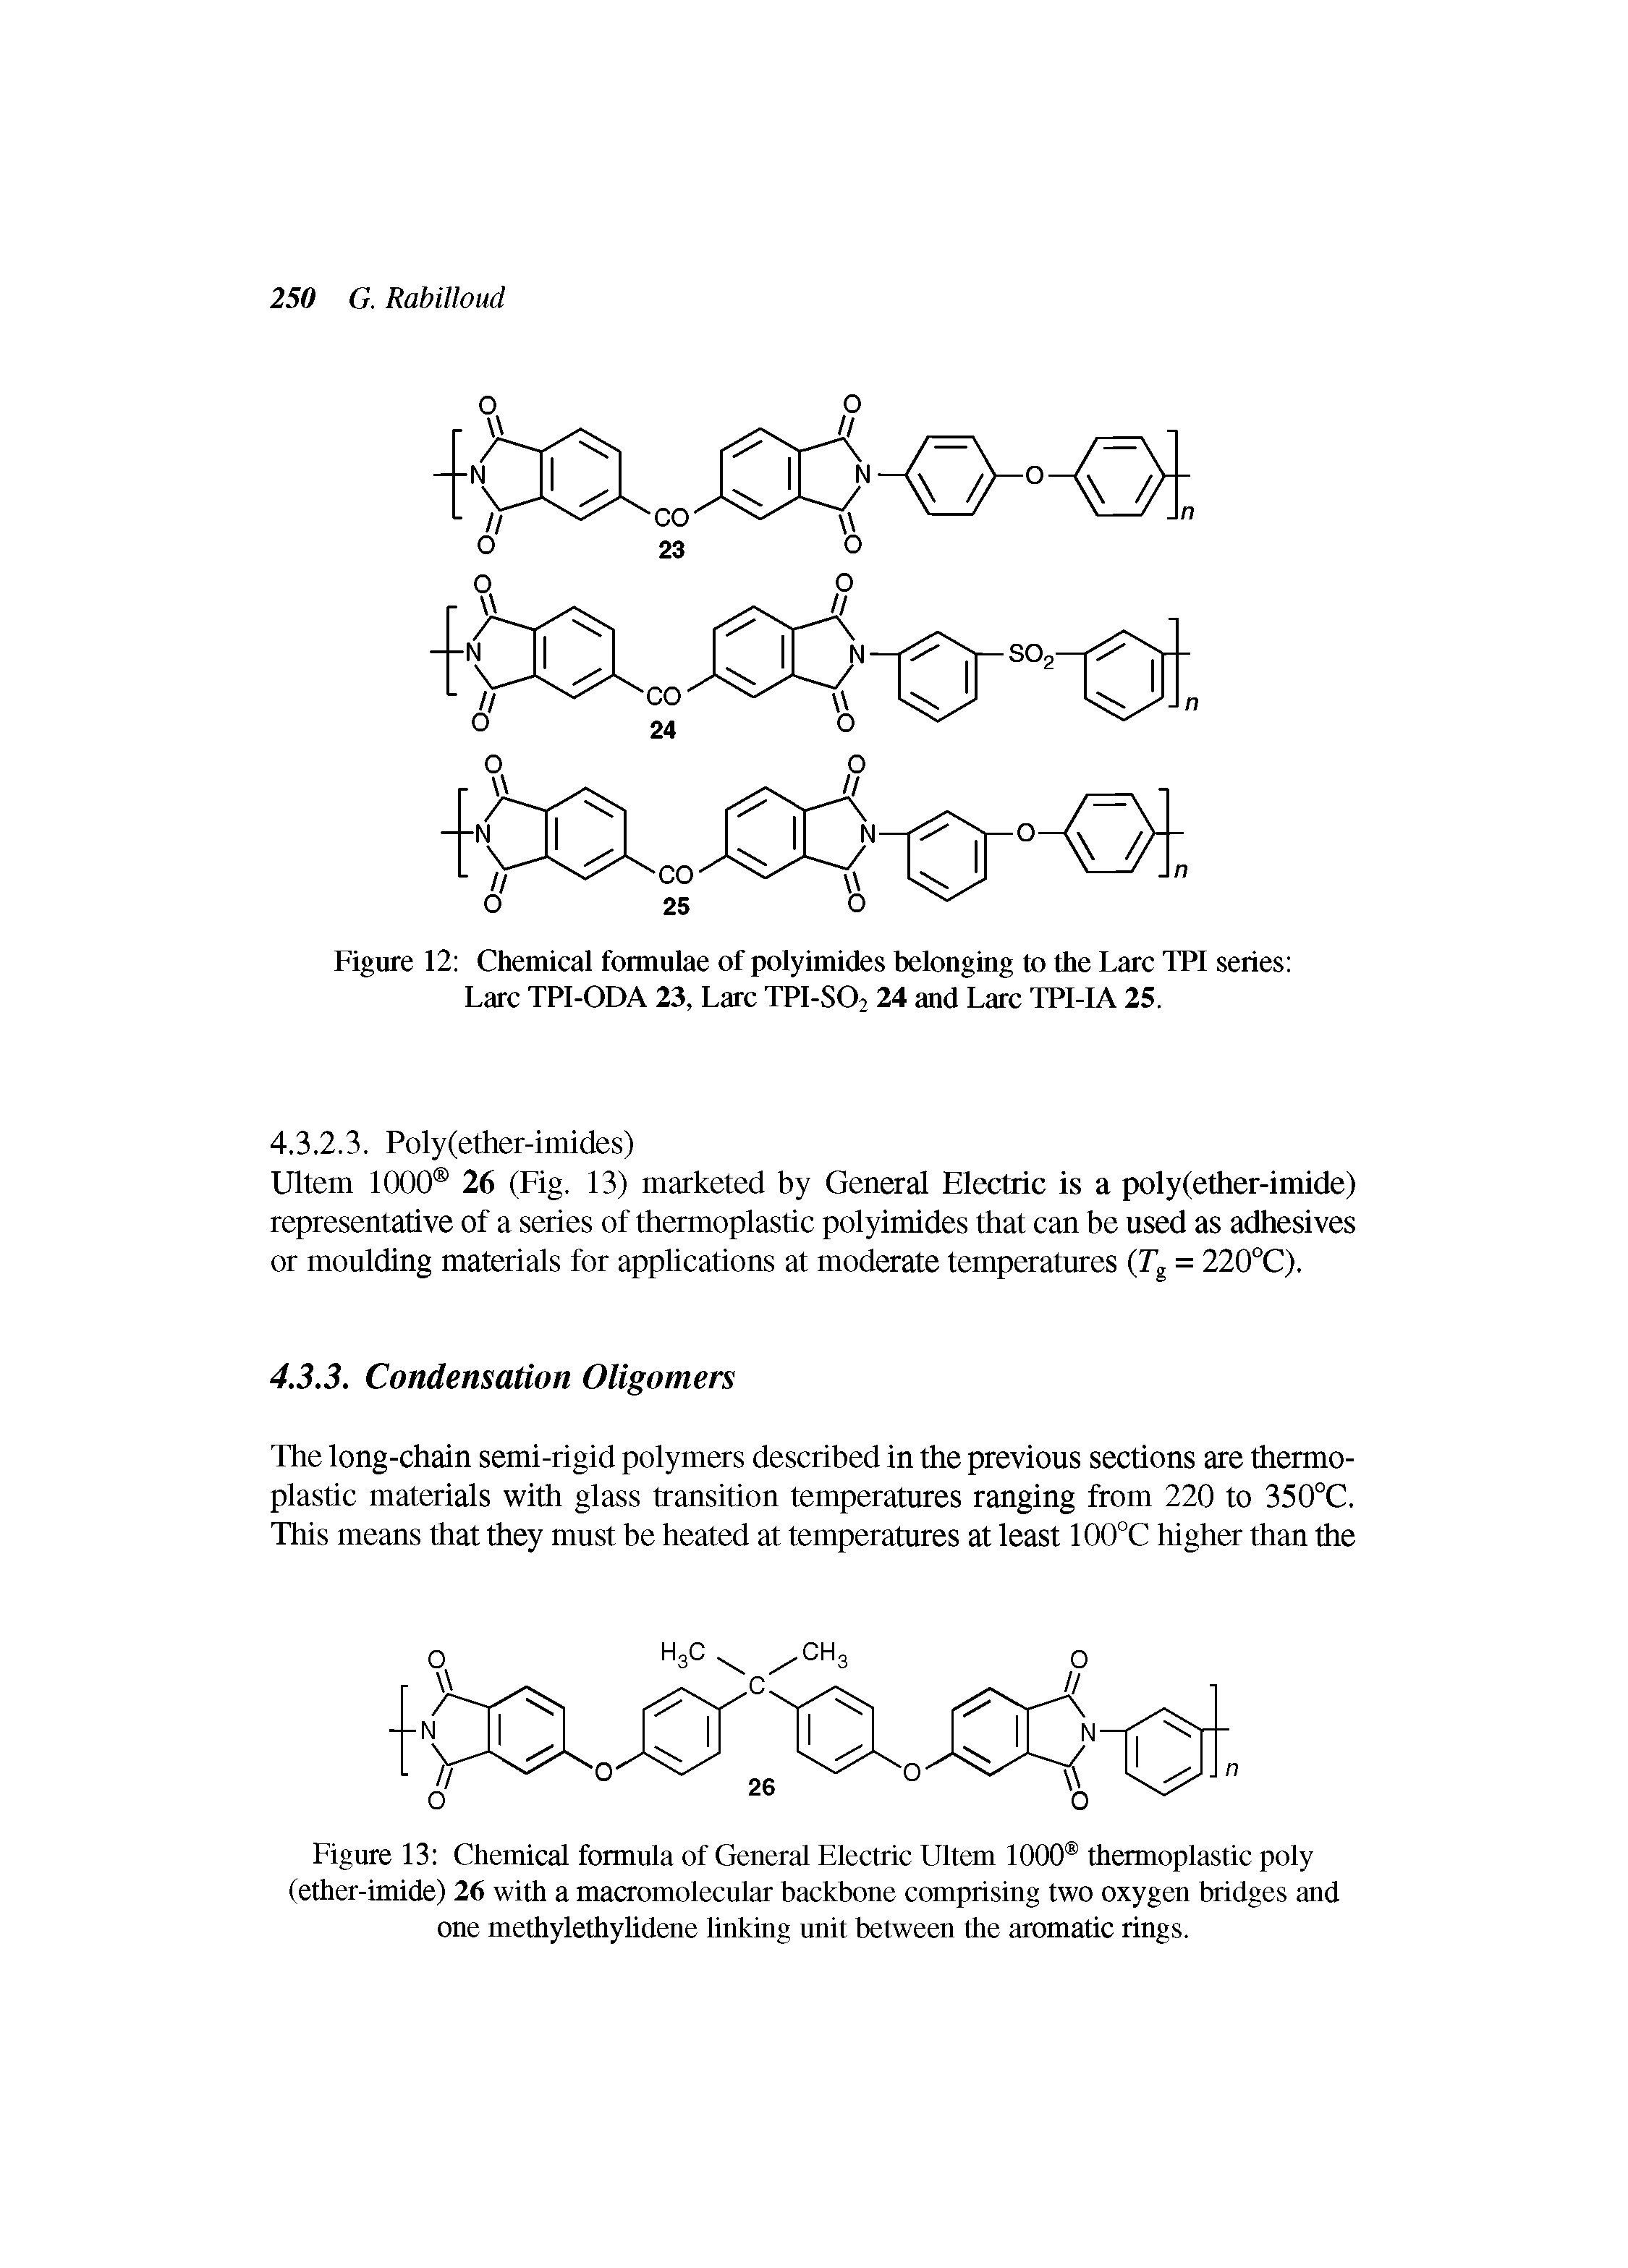 Figure 12 Chemical formulae of polyimides belonging to the Larc TPI series Fare TPl-ODA 23, Larc TPI-SO2 24 and Larc TPI-IA 25.